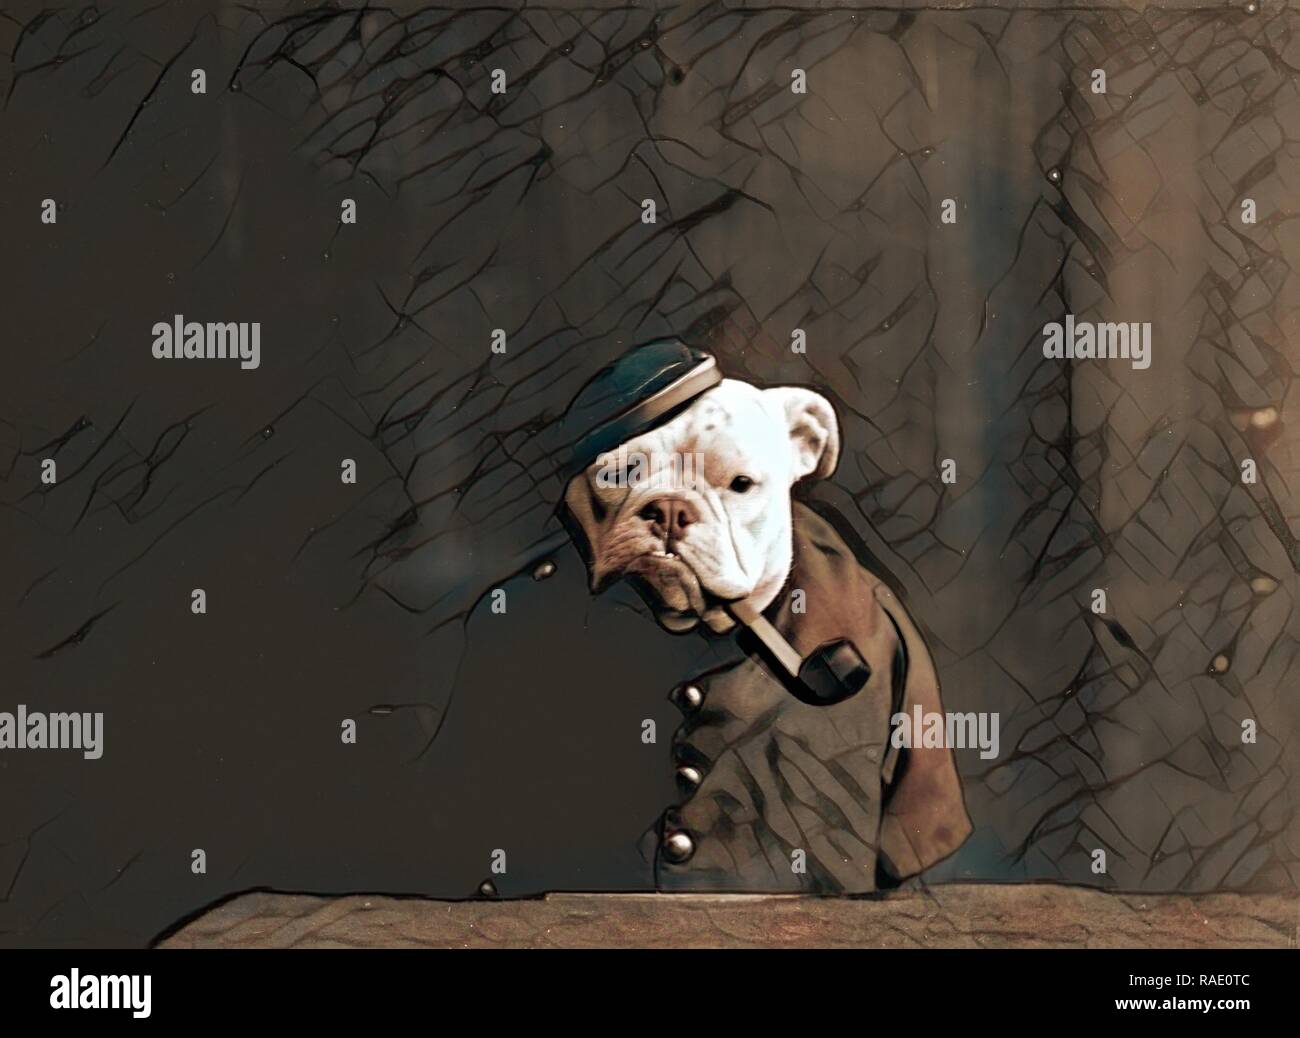 Tommy Atkins, Dogs, Animals in human situations, Pipes, 190. Reimagined by Gibon. Classic art with a modern twist reimagined Stock Photo